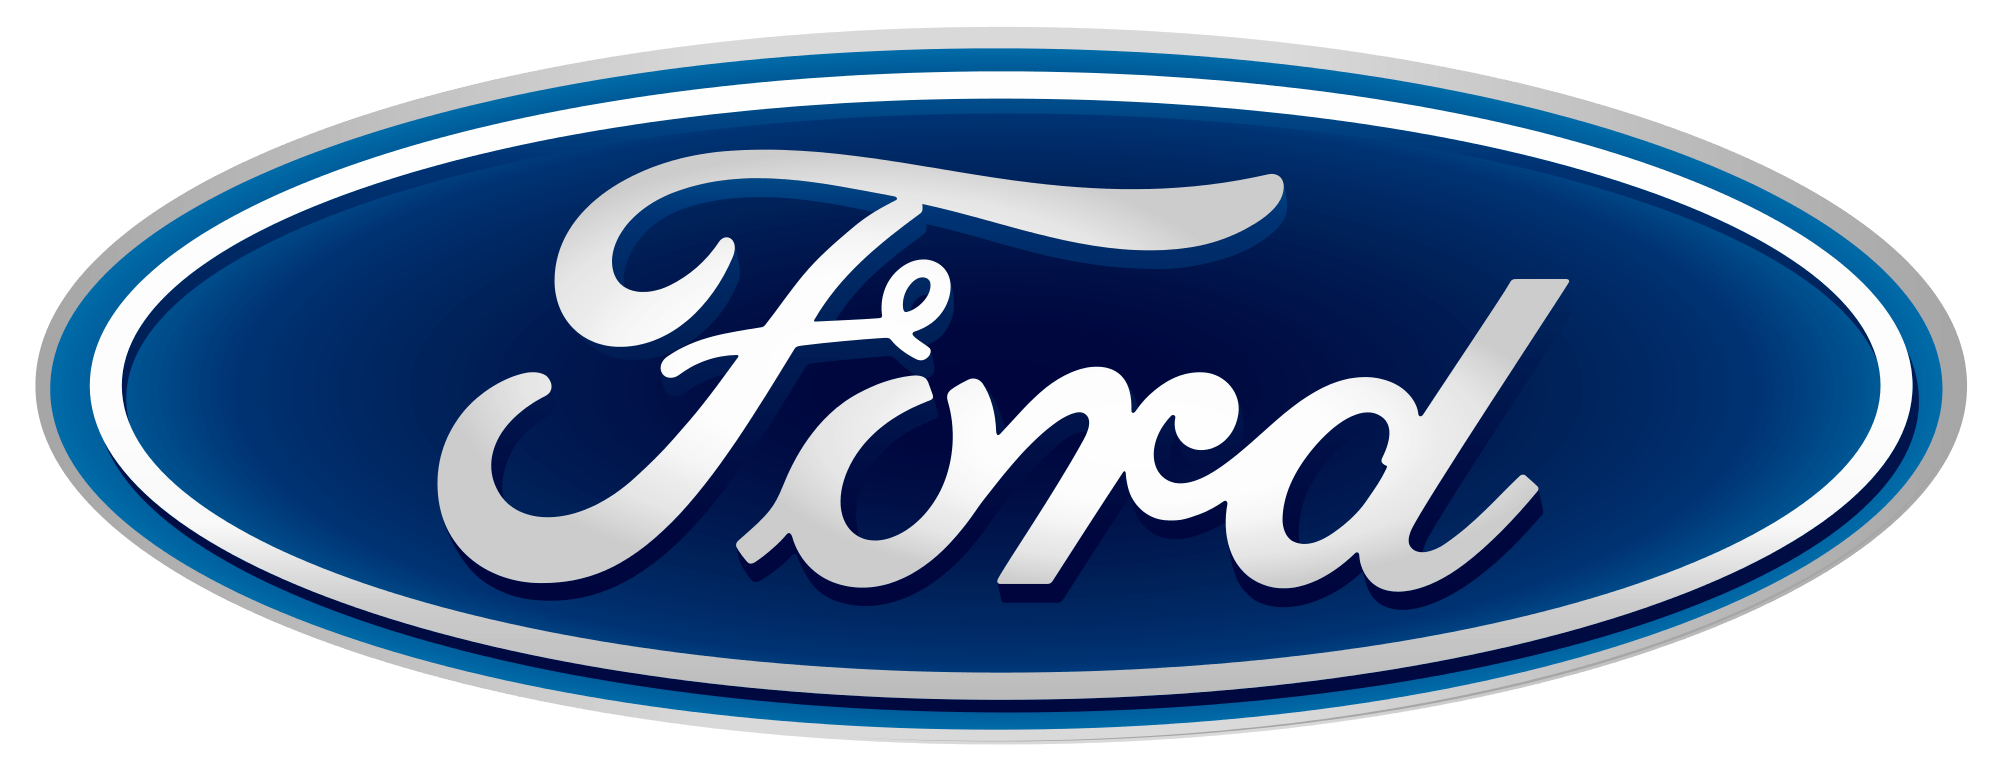 2017 Ford Logo - Recalls Cost Ford During First Quarter 2017 | WKAR